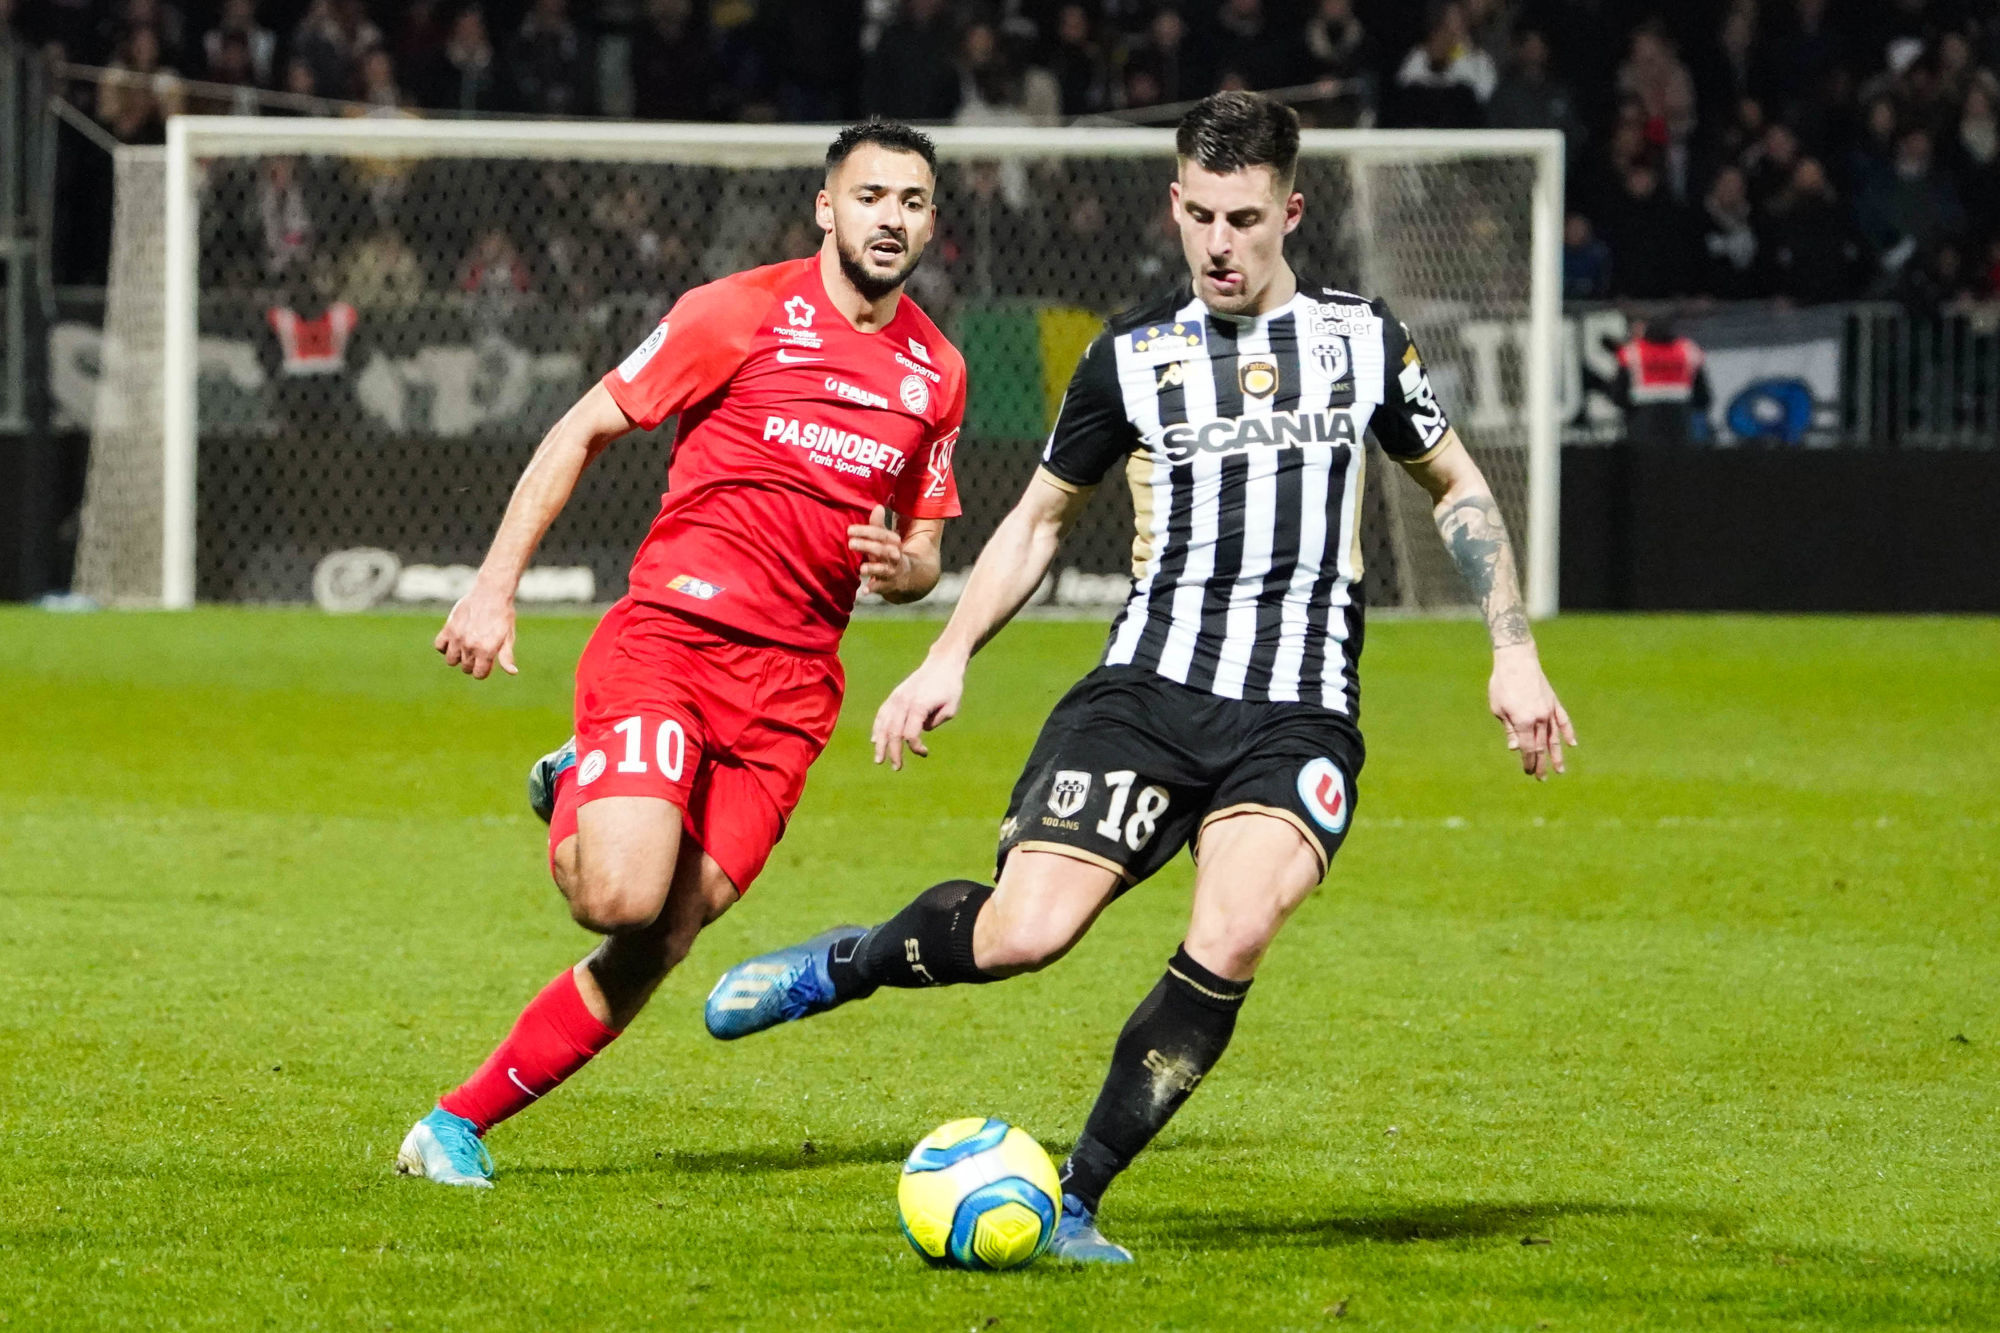 Baptiste SANTAMARIA  of Angers and Gaetan LABORDE of Montpellier during the Ligue 1 match between Angers SCO and Montpellier HSC at Stade Raymond Kopa on February 22, 2020 in Angers, France. (Photo by Eddy Lemaistre/Icon Sport) - Baptiste SANTAMARIA - Gaetan LABORDE - Stade Raymond Kopa - Angers (France)